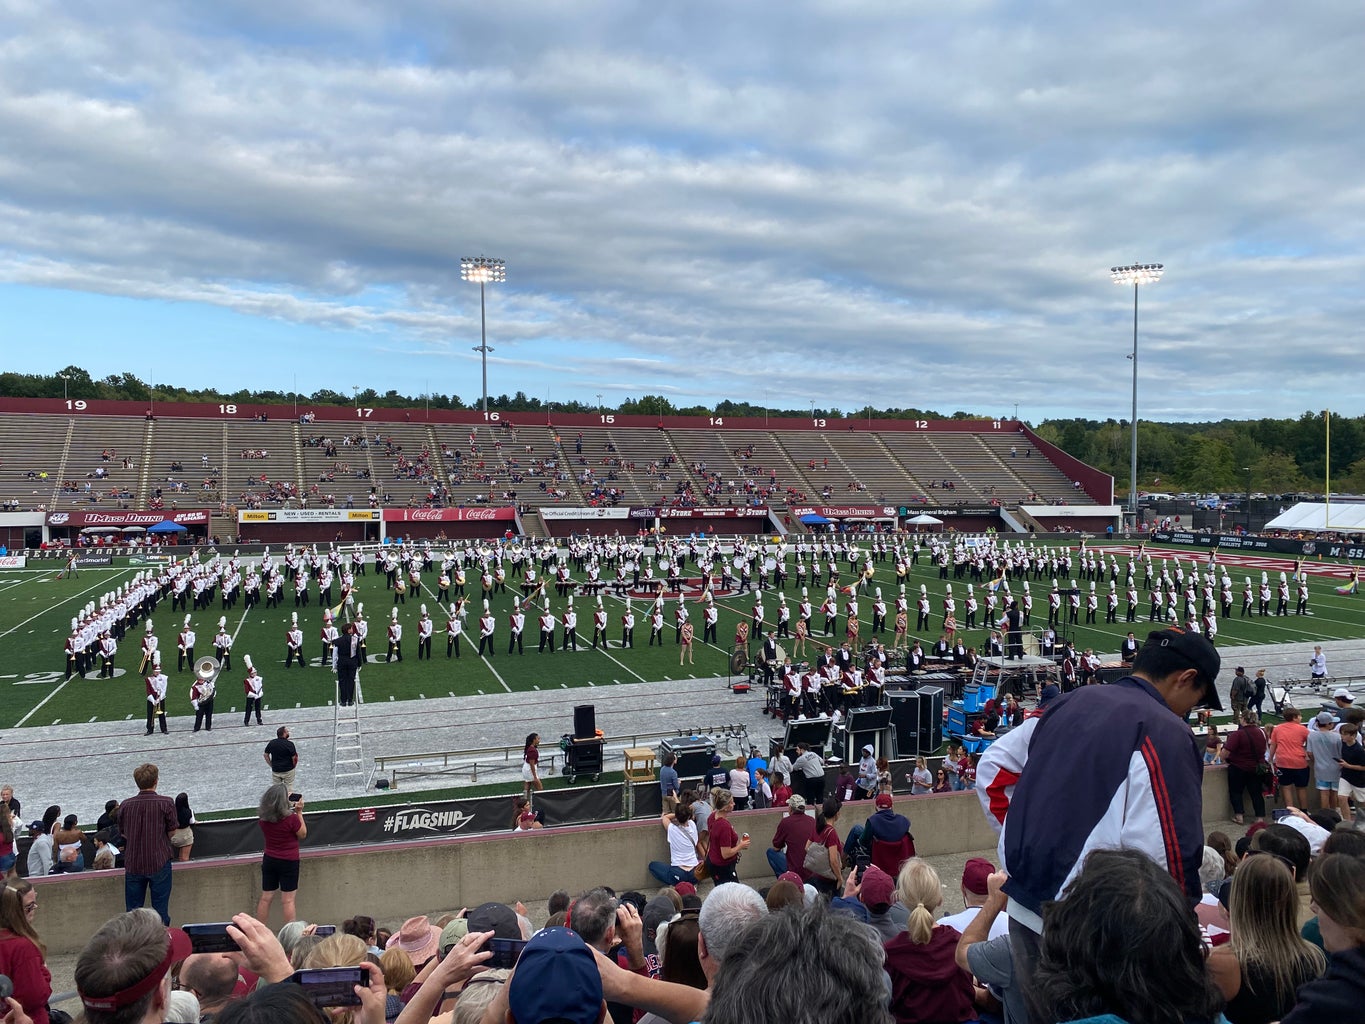 UMass Marching Band (resubmission in correct form)